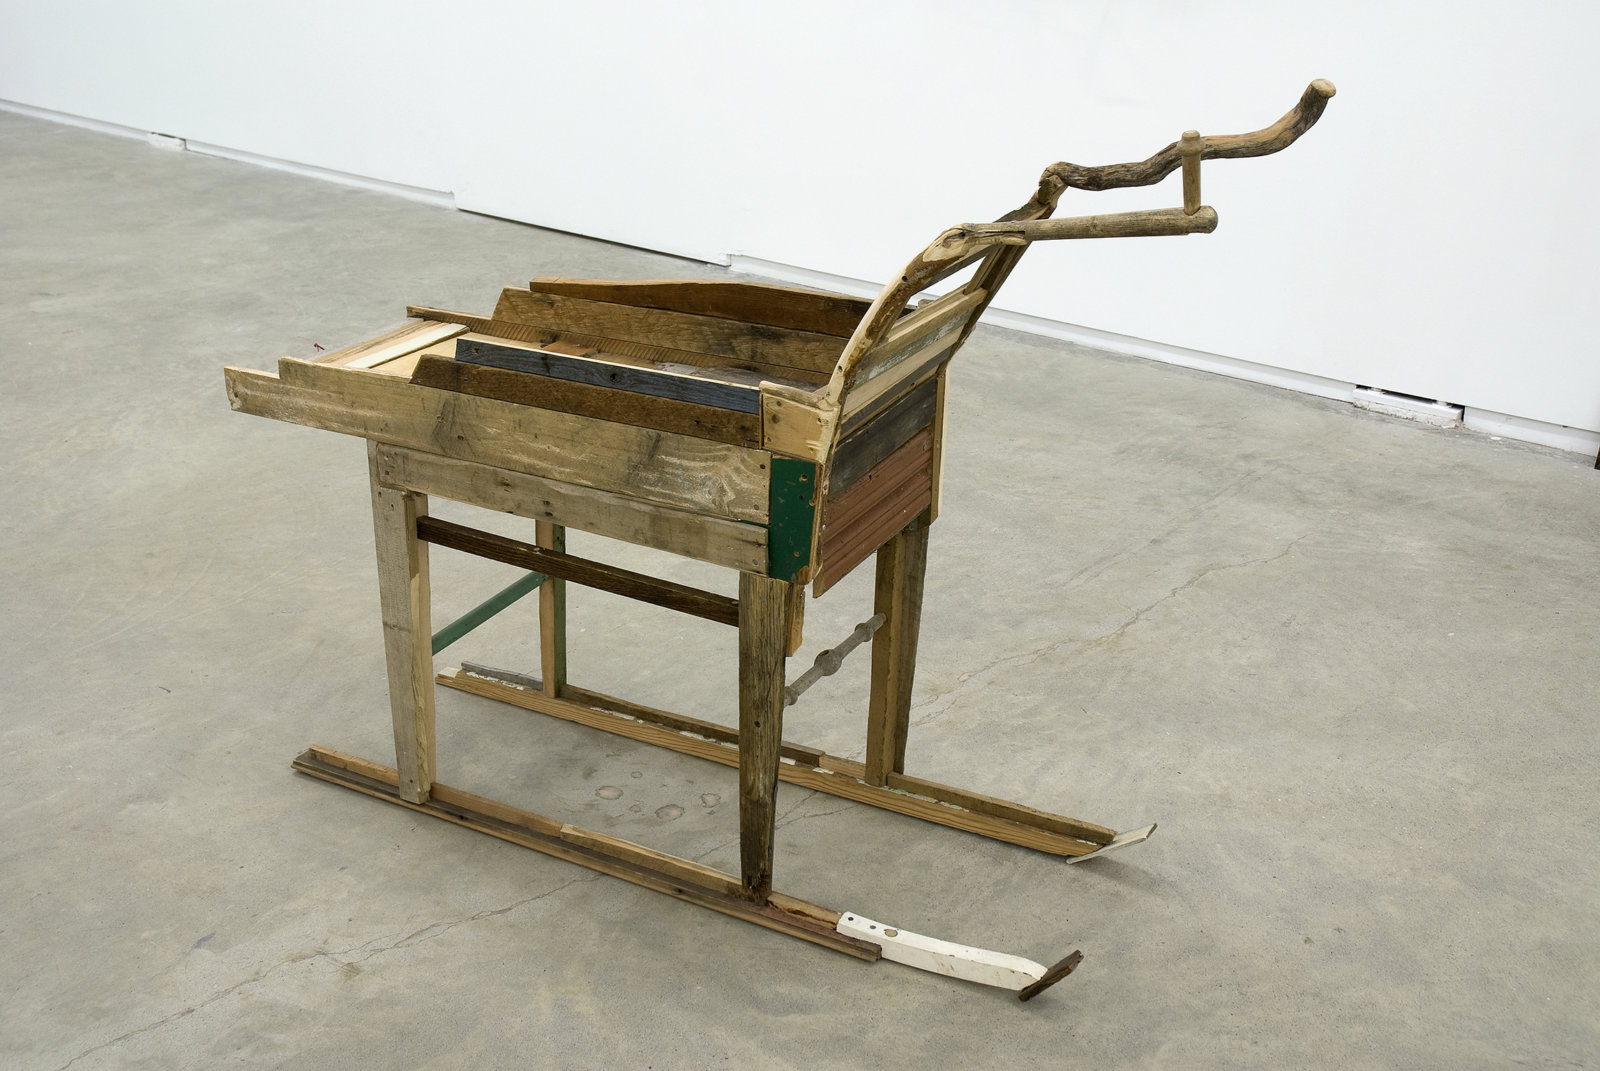 Ashes Withyman, Donkey, Sculpture as Companion (With Device to Stop Braying) (from Uncertain Pilgrimage), 2006–2009, found wood, nails, screws, twine, stone, 47 x 56 x 18 in. (119 x 142 x 46 cm)